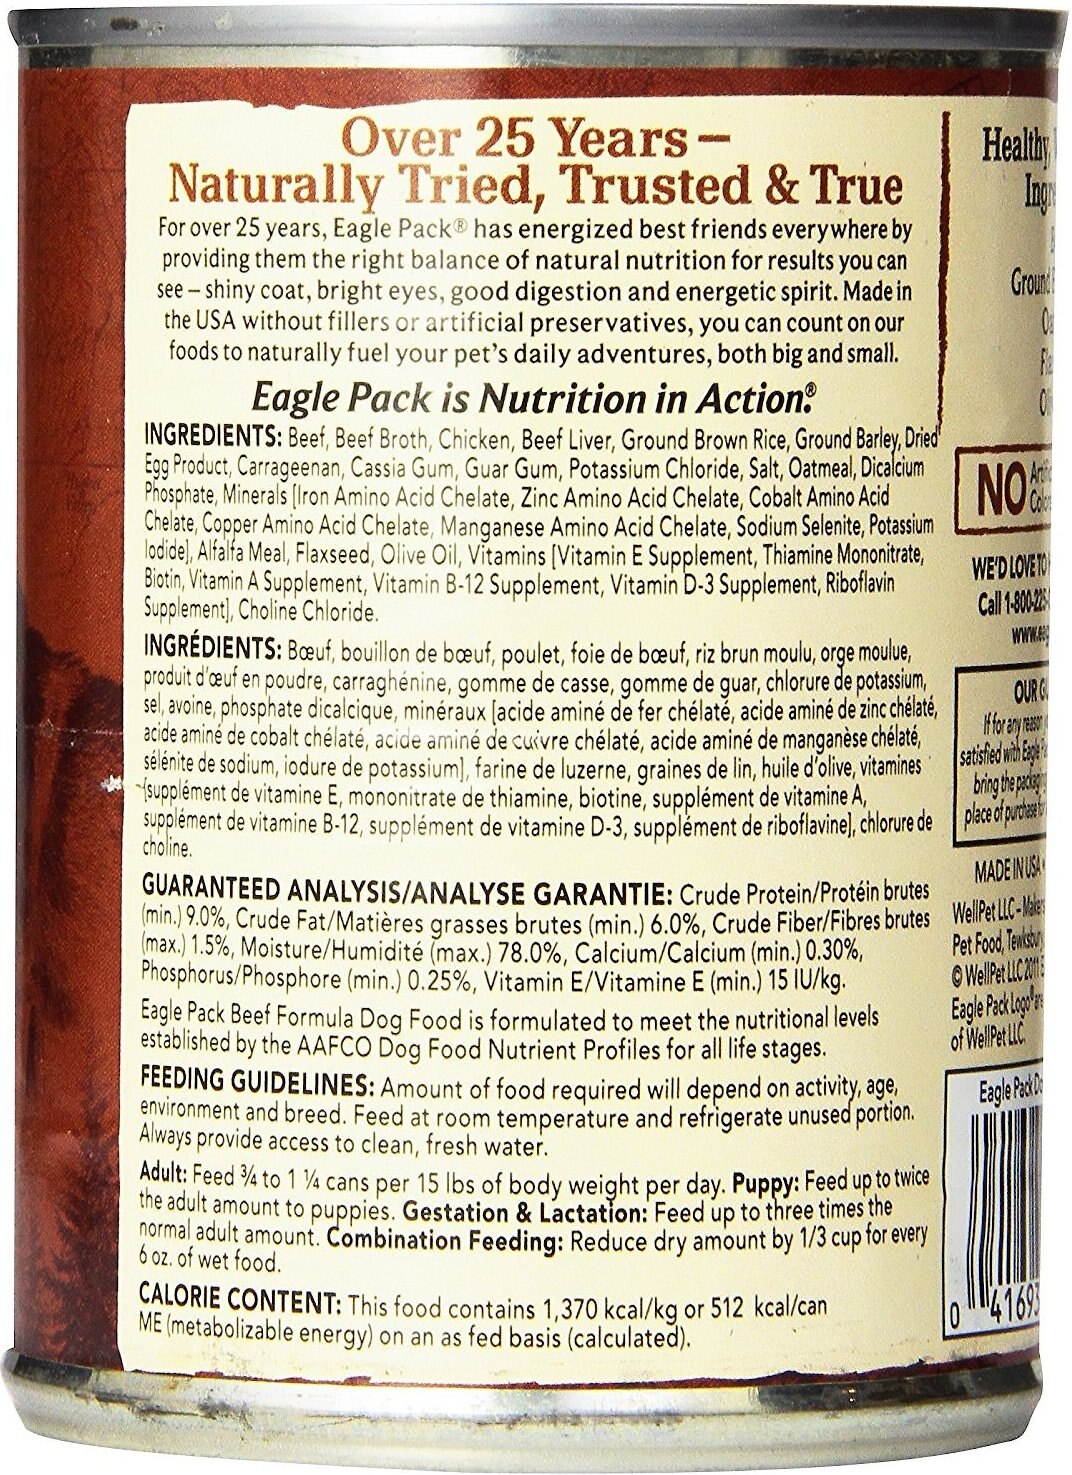 where is eagle pack dog food manufactured